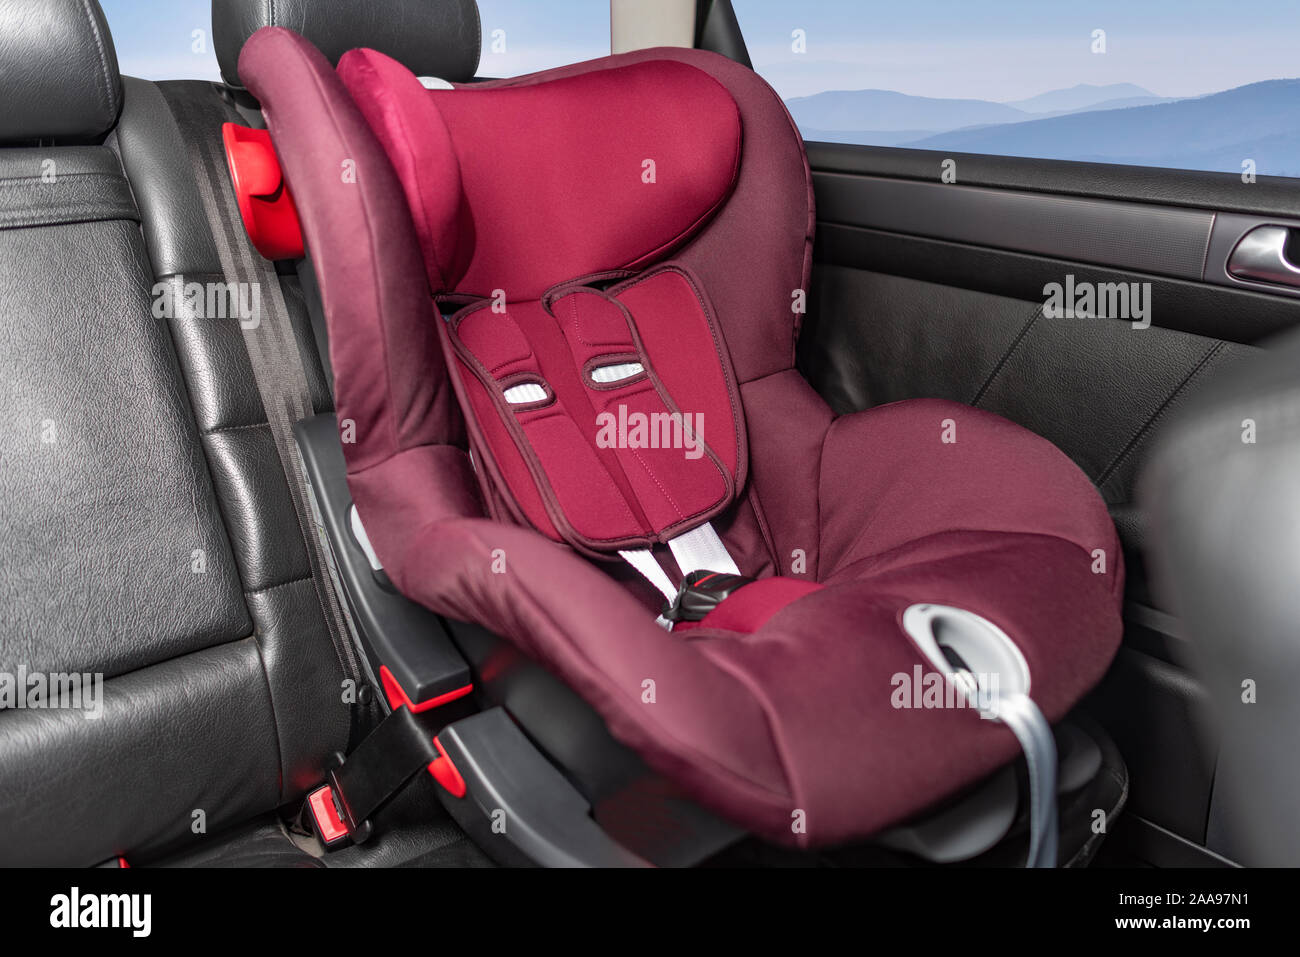 Children's car seat in the car. Stock Photo